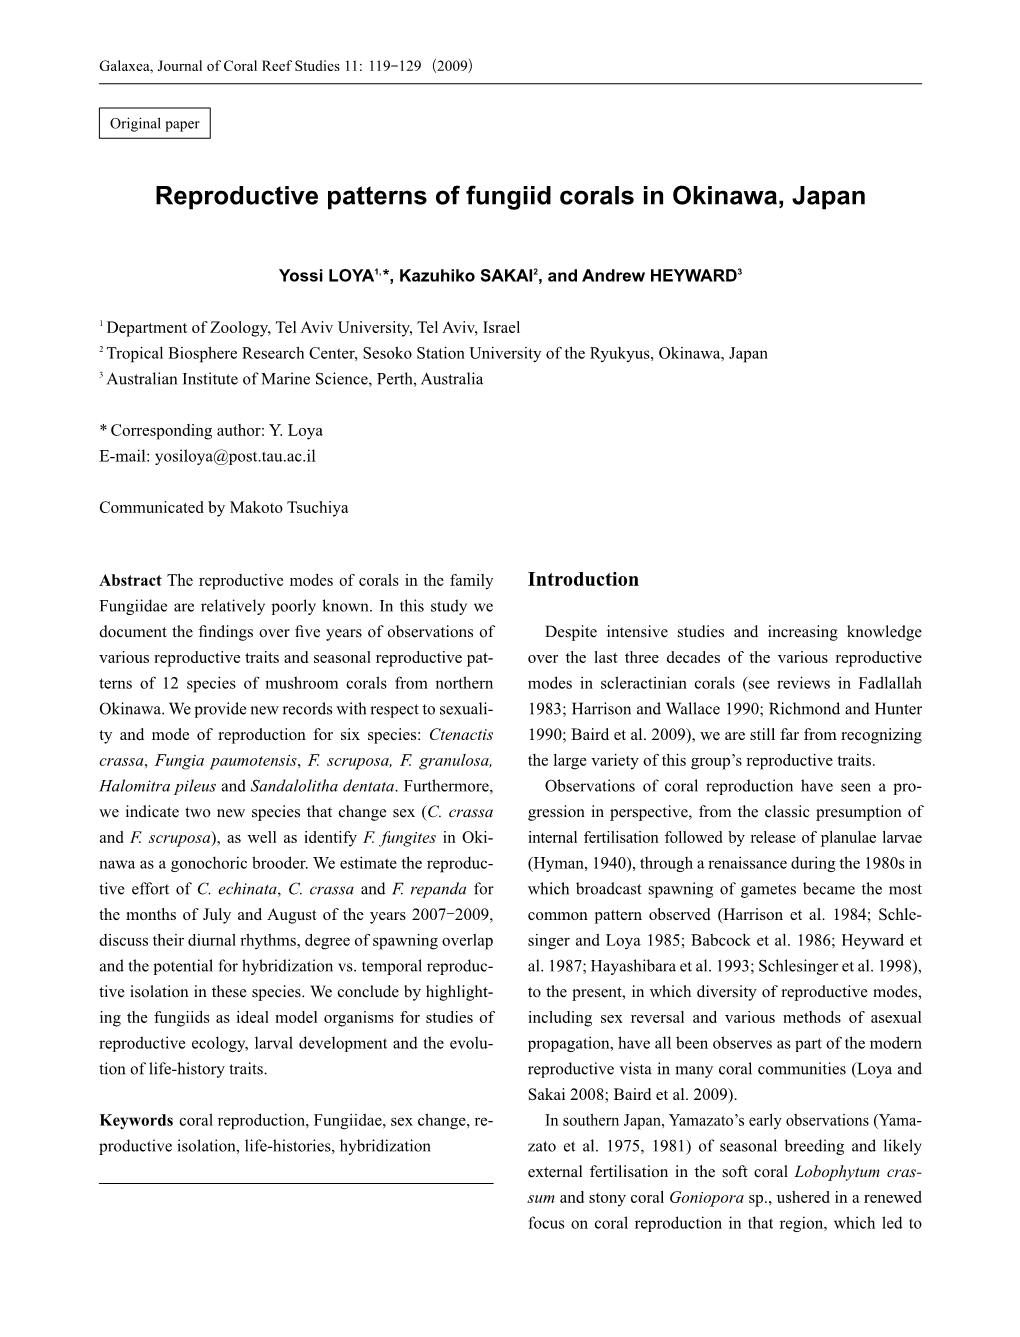 Reproductive Patterns of Fungiid Corals in Okinawa, Japan